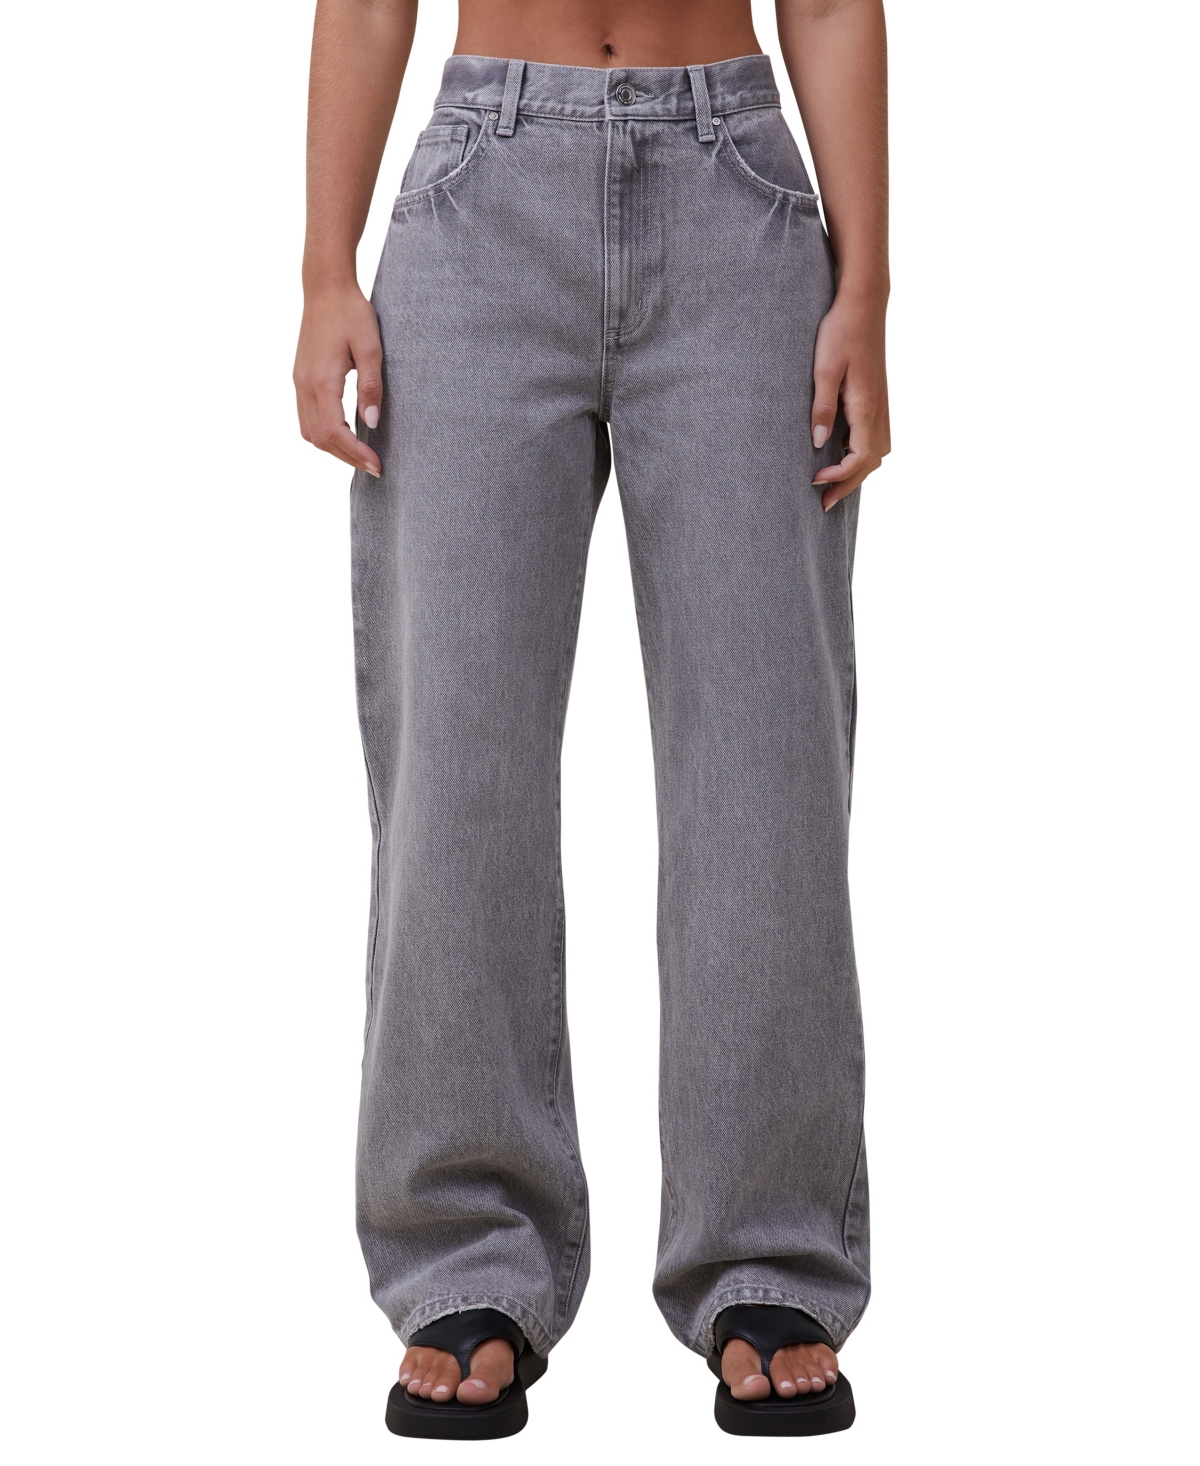 Women's Loose Straight Jeans - Ash Gray